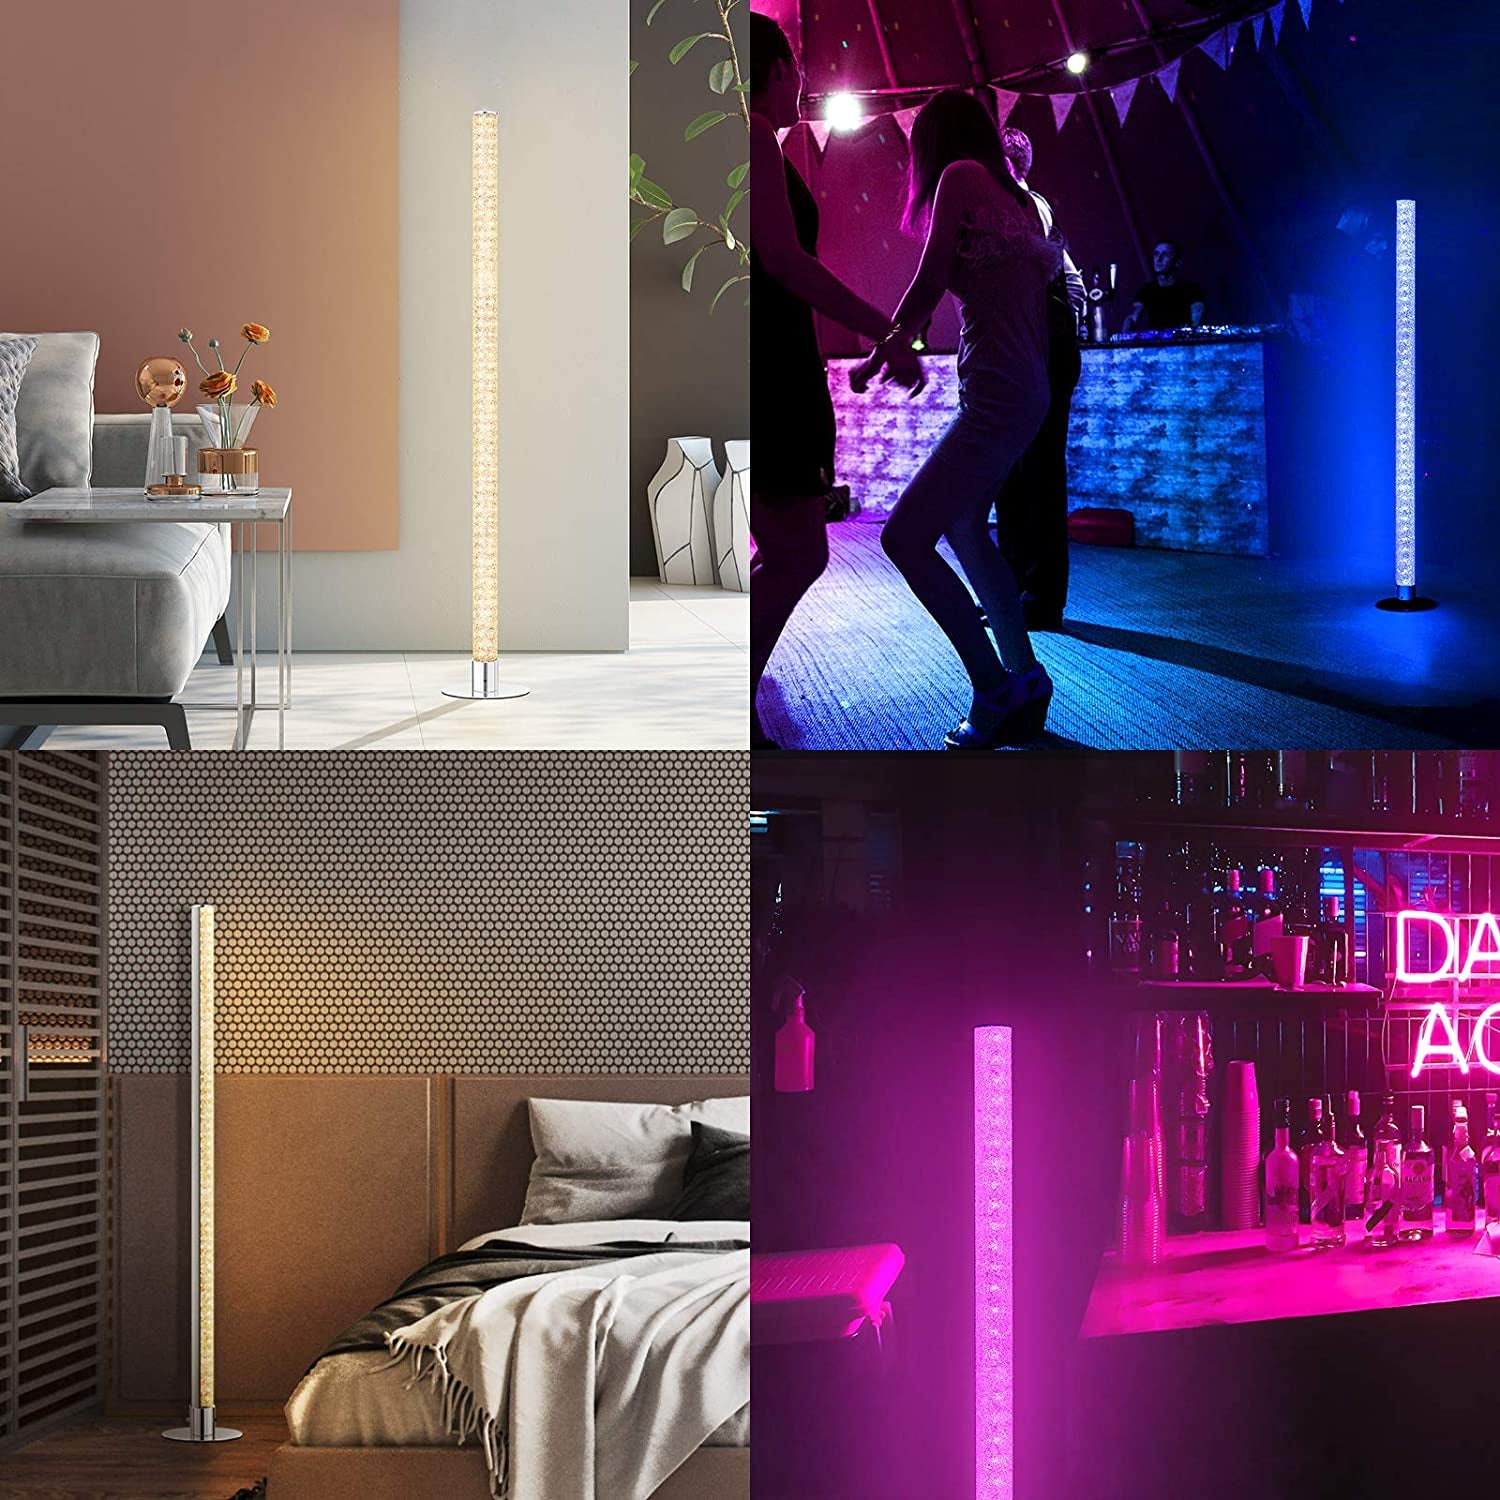 LED Corner Floor Lamp with Remote, Modern Dimmable Standing Tall Lamp Work with Alexa, Google Home, Wifi Smart RGBW Color Changing Bright Light for Living Room, Bedroom, Home Office